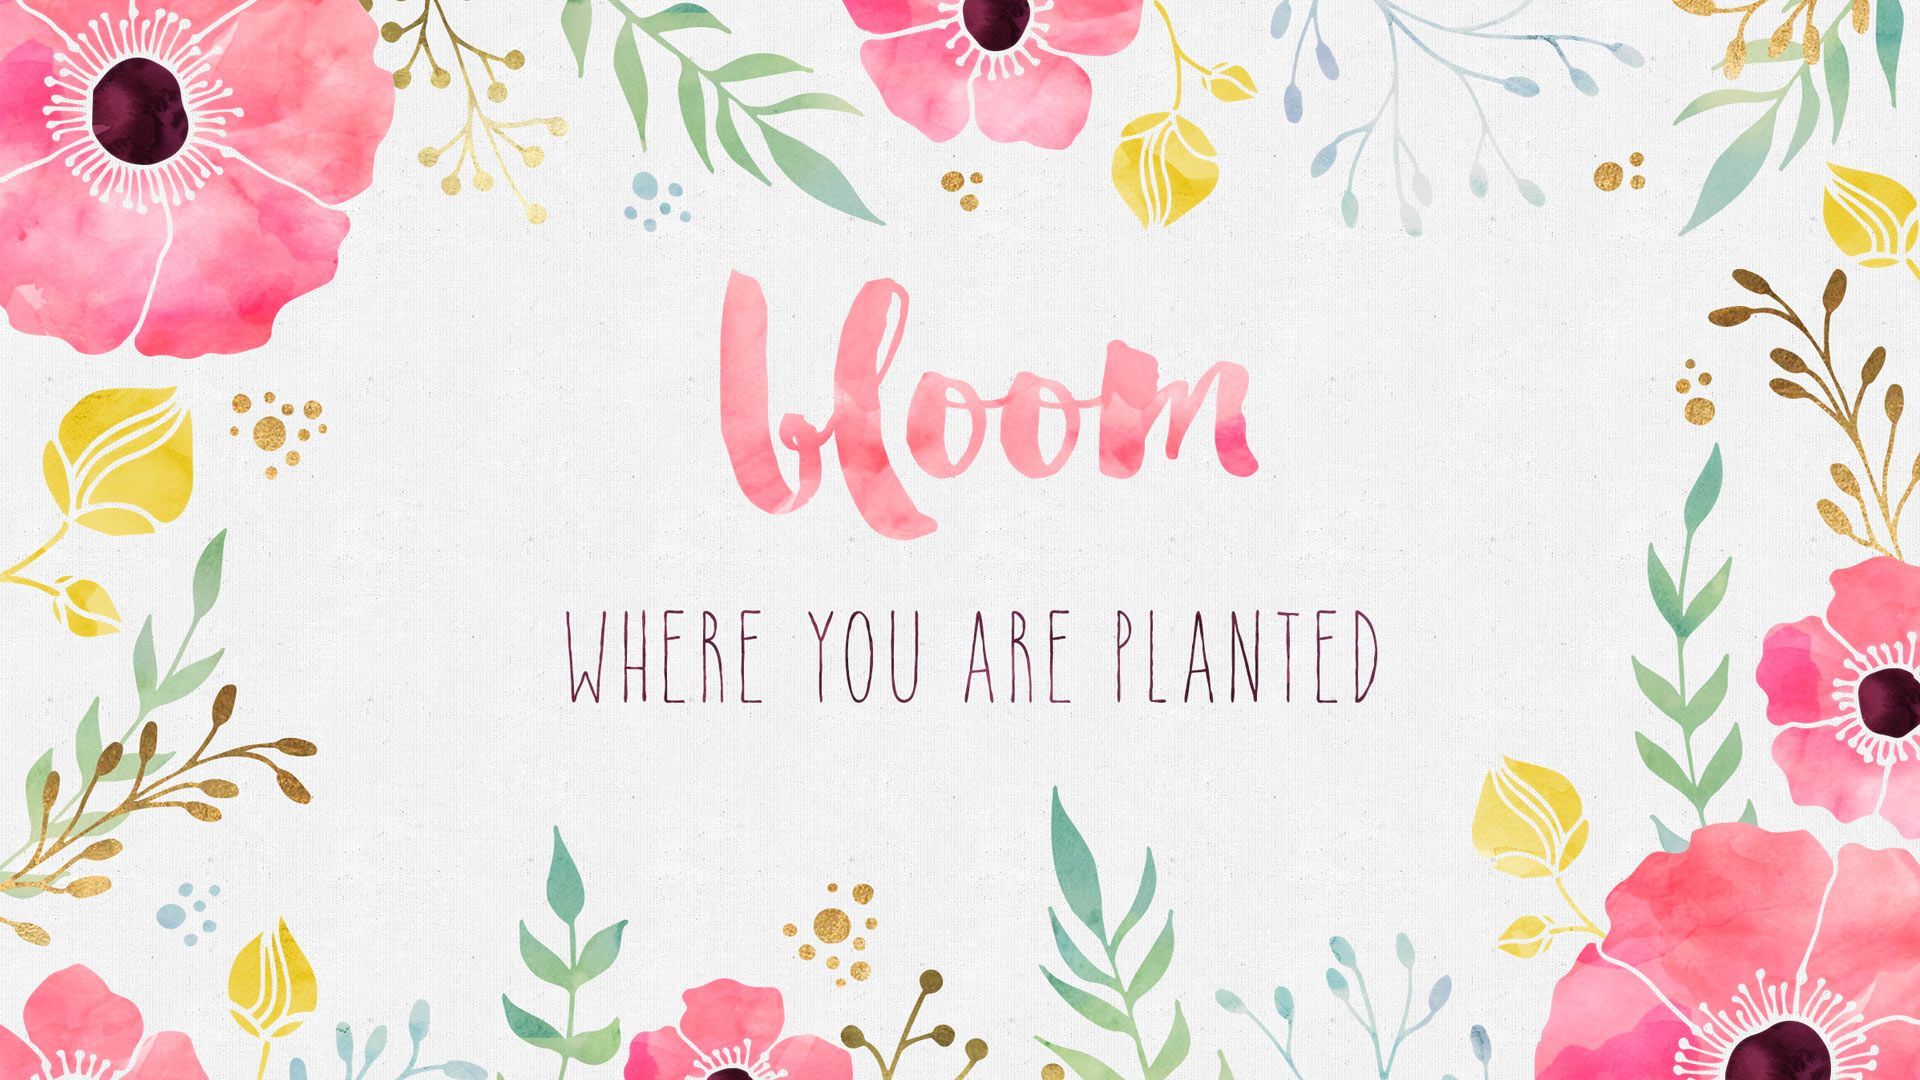 Free Desktop Wallpaper Where you are Planted. Cute desktop wallpaper, Spring desktop wallpaper, Free desktop wallpaper